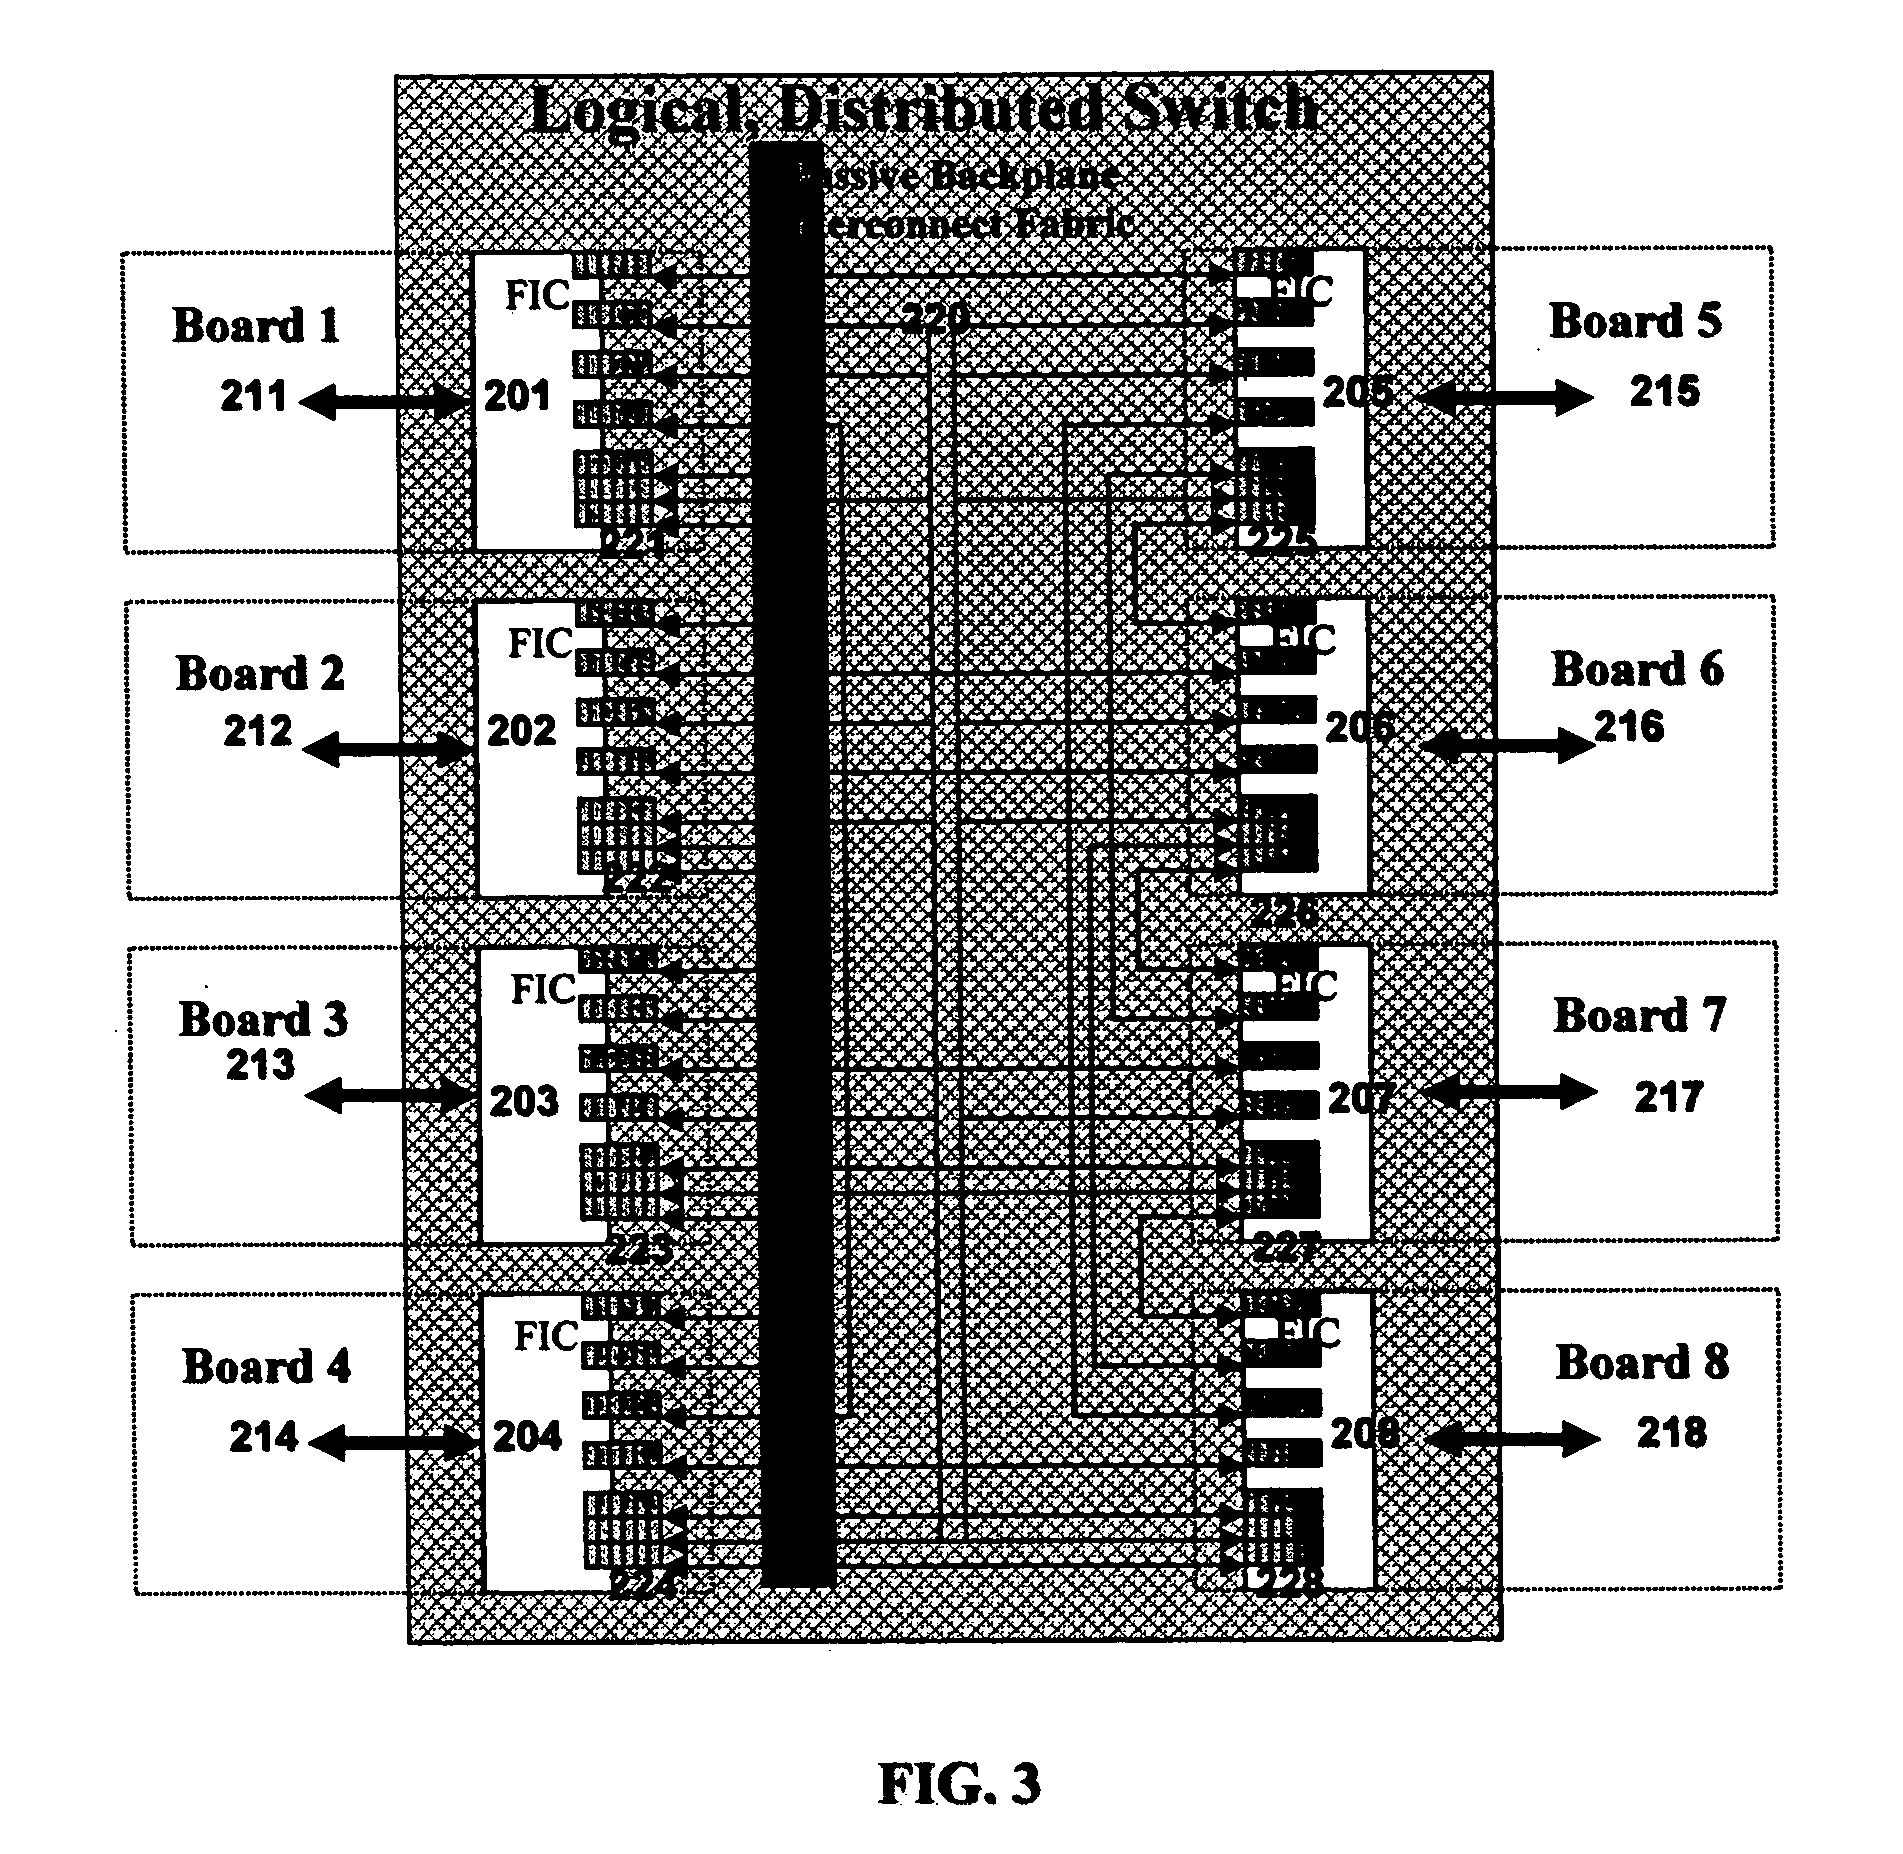 Multi-port high-speed serial fabric interconnect chip in a meshed configuration